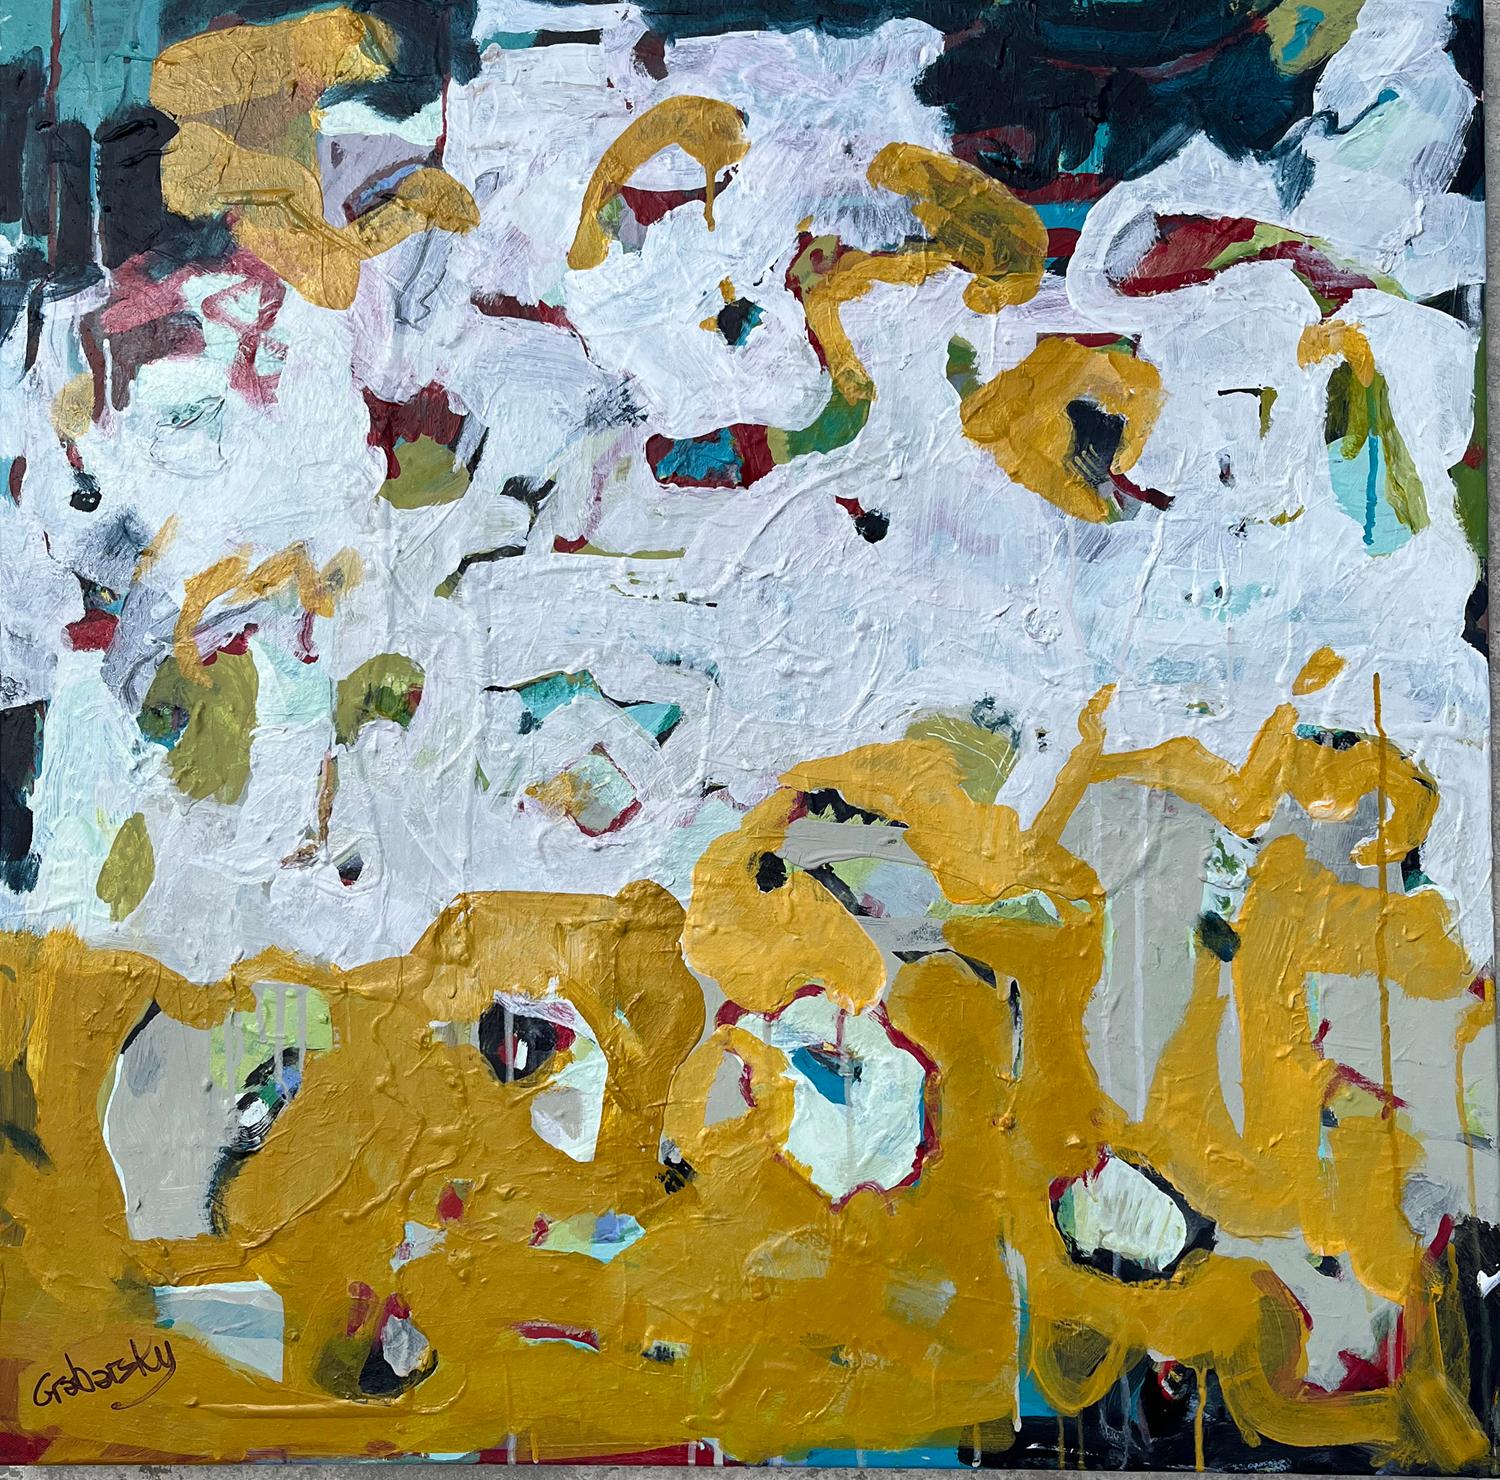 <p>Artist Comments<br>Artist Sheila Grabarsky presents a joyful amalgamation of acrylic paint and acrylic skinsâ€”pulled from dried palettes and adhered to the surface. She layers the components to create depth and dynamic shapes in the abstract